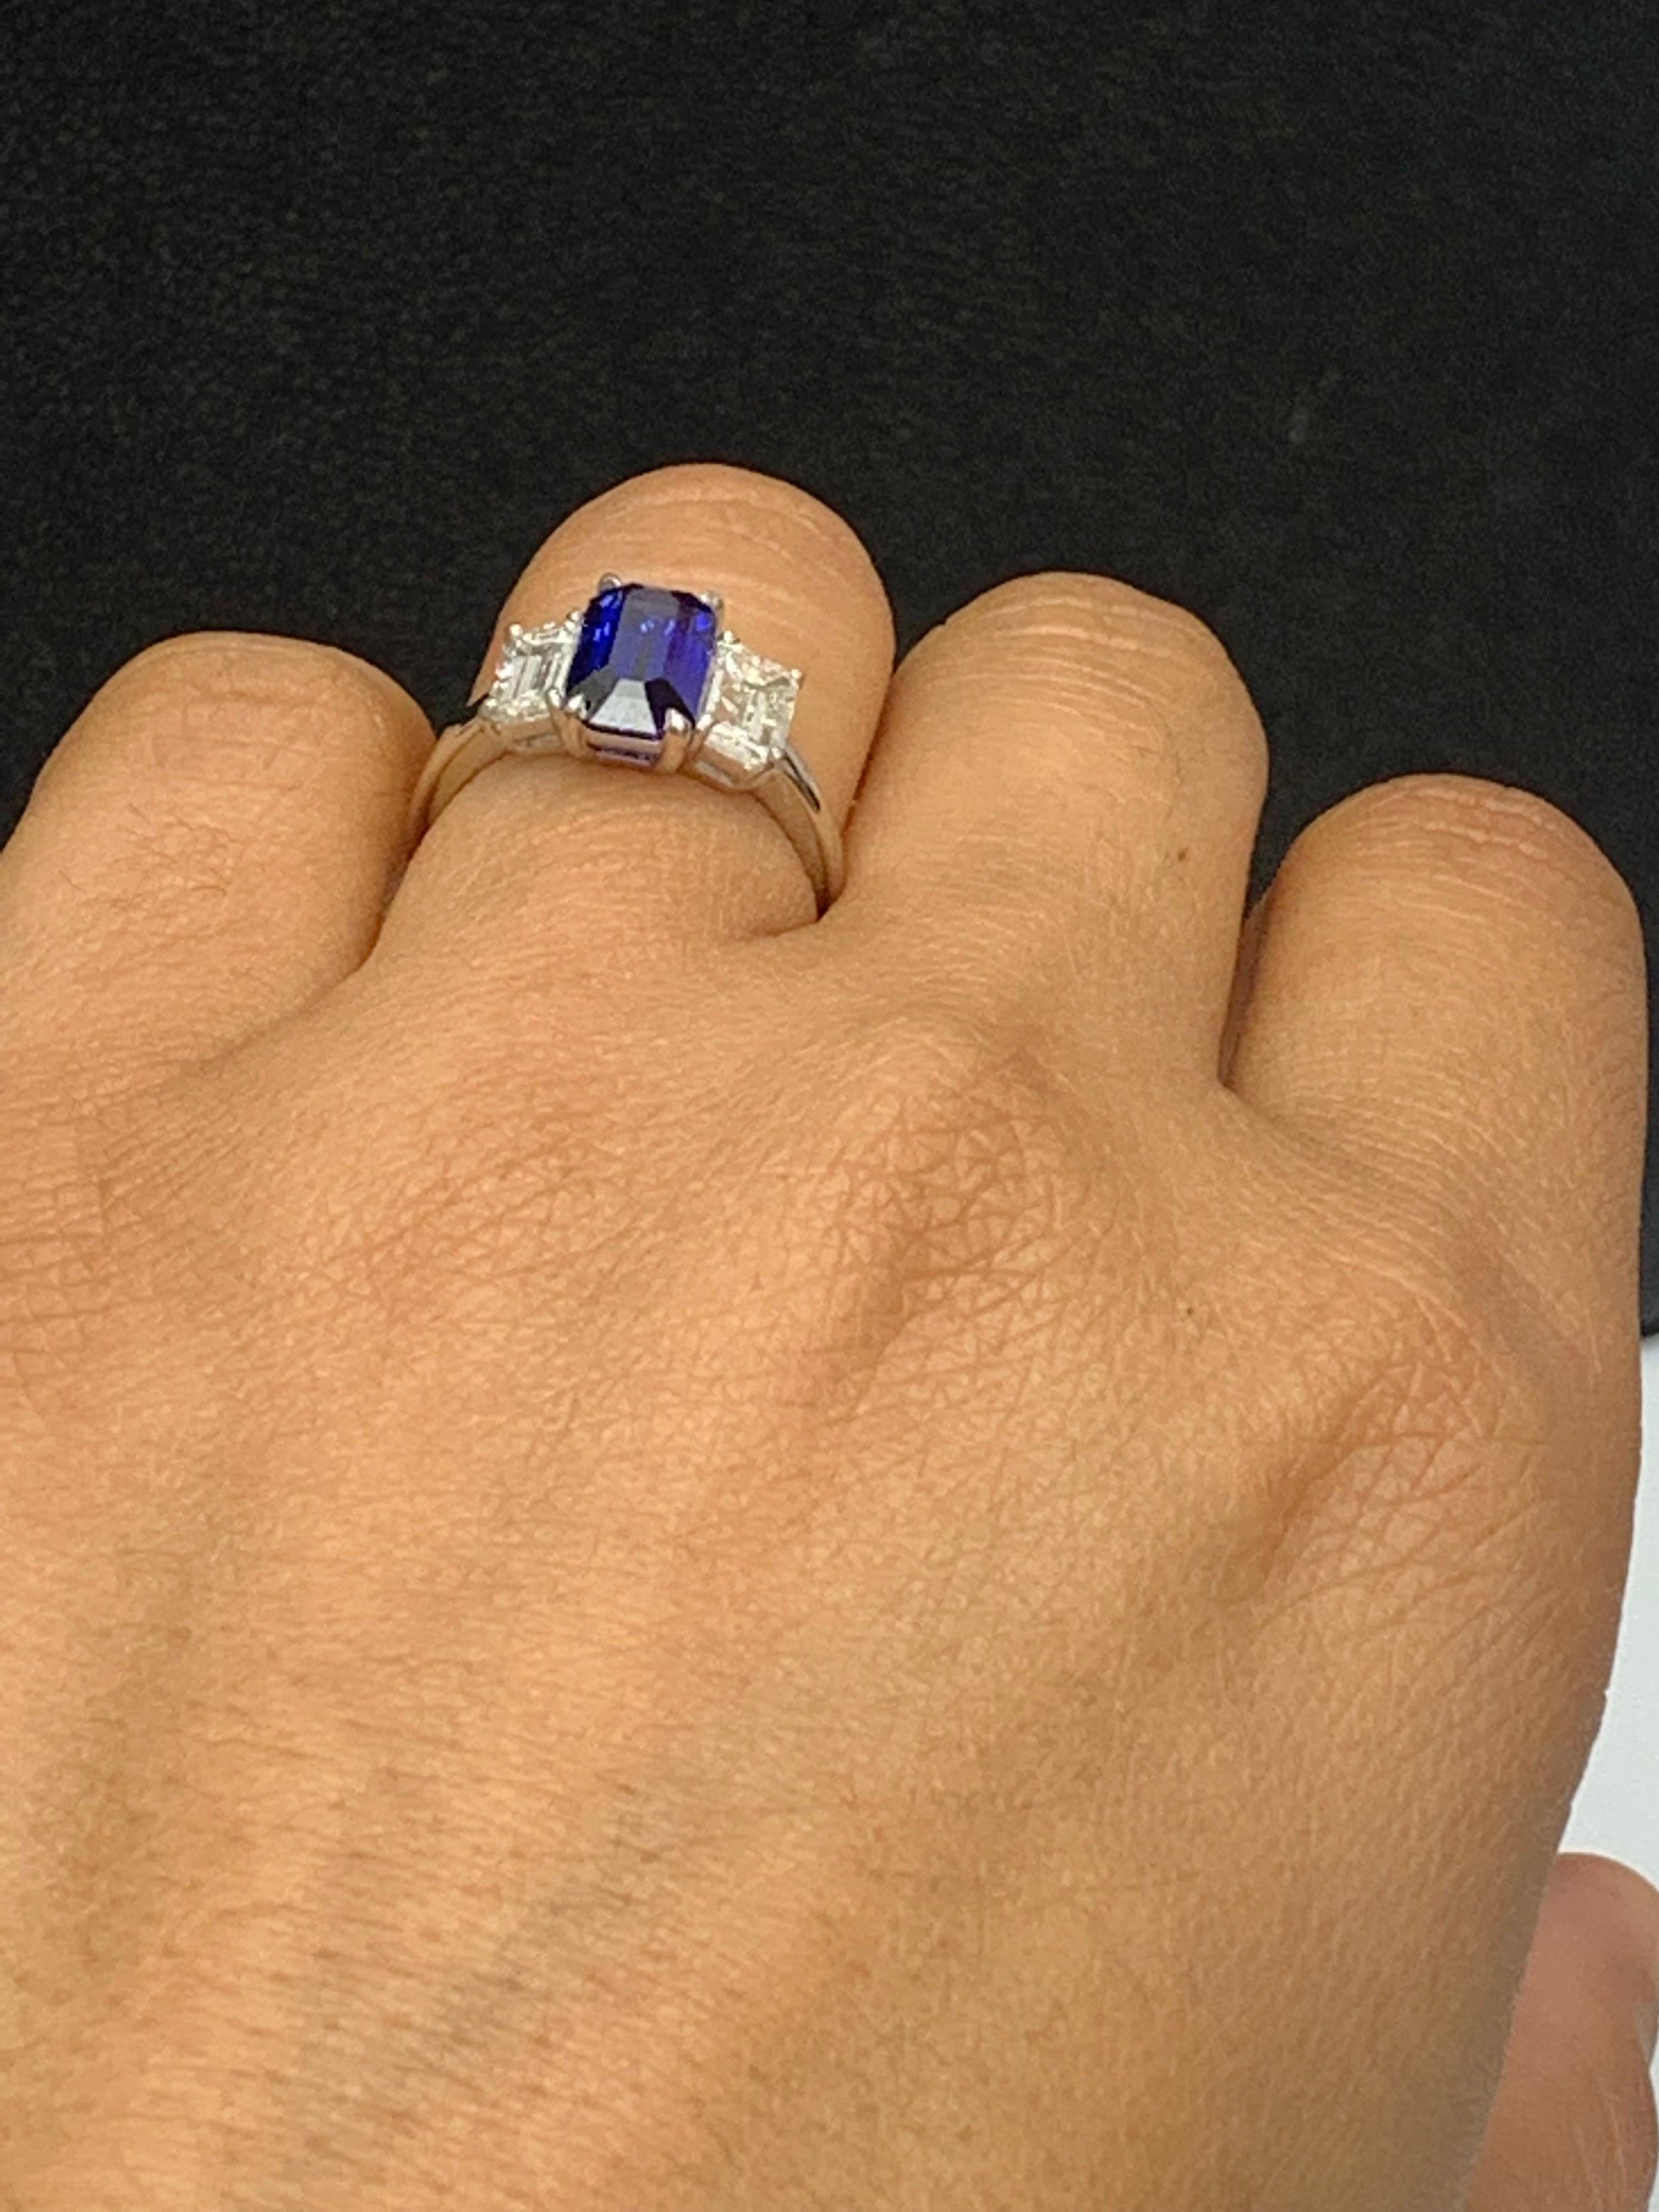 Certified 2.05 Carat Emerald Cut Sapphire & Diamond Engagement Ring in Platinum For Sale 2